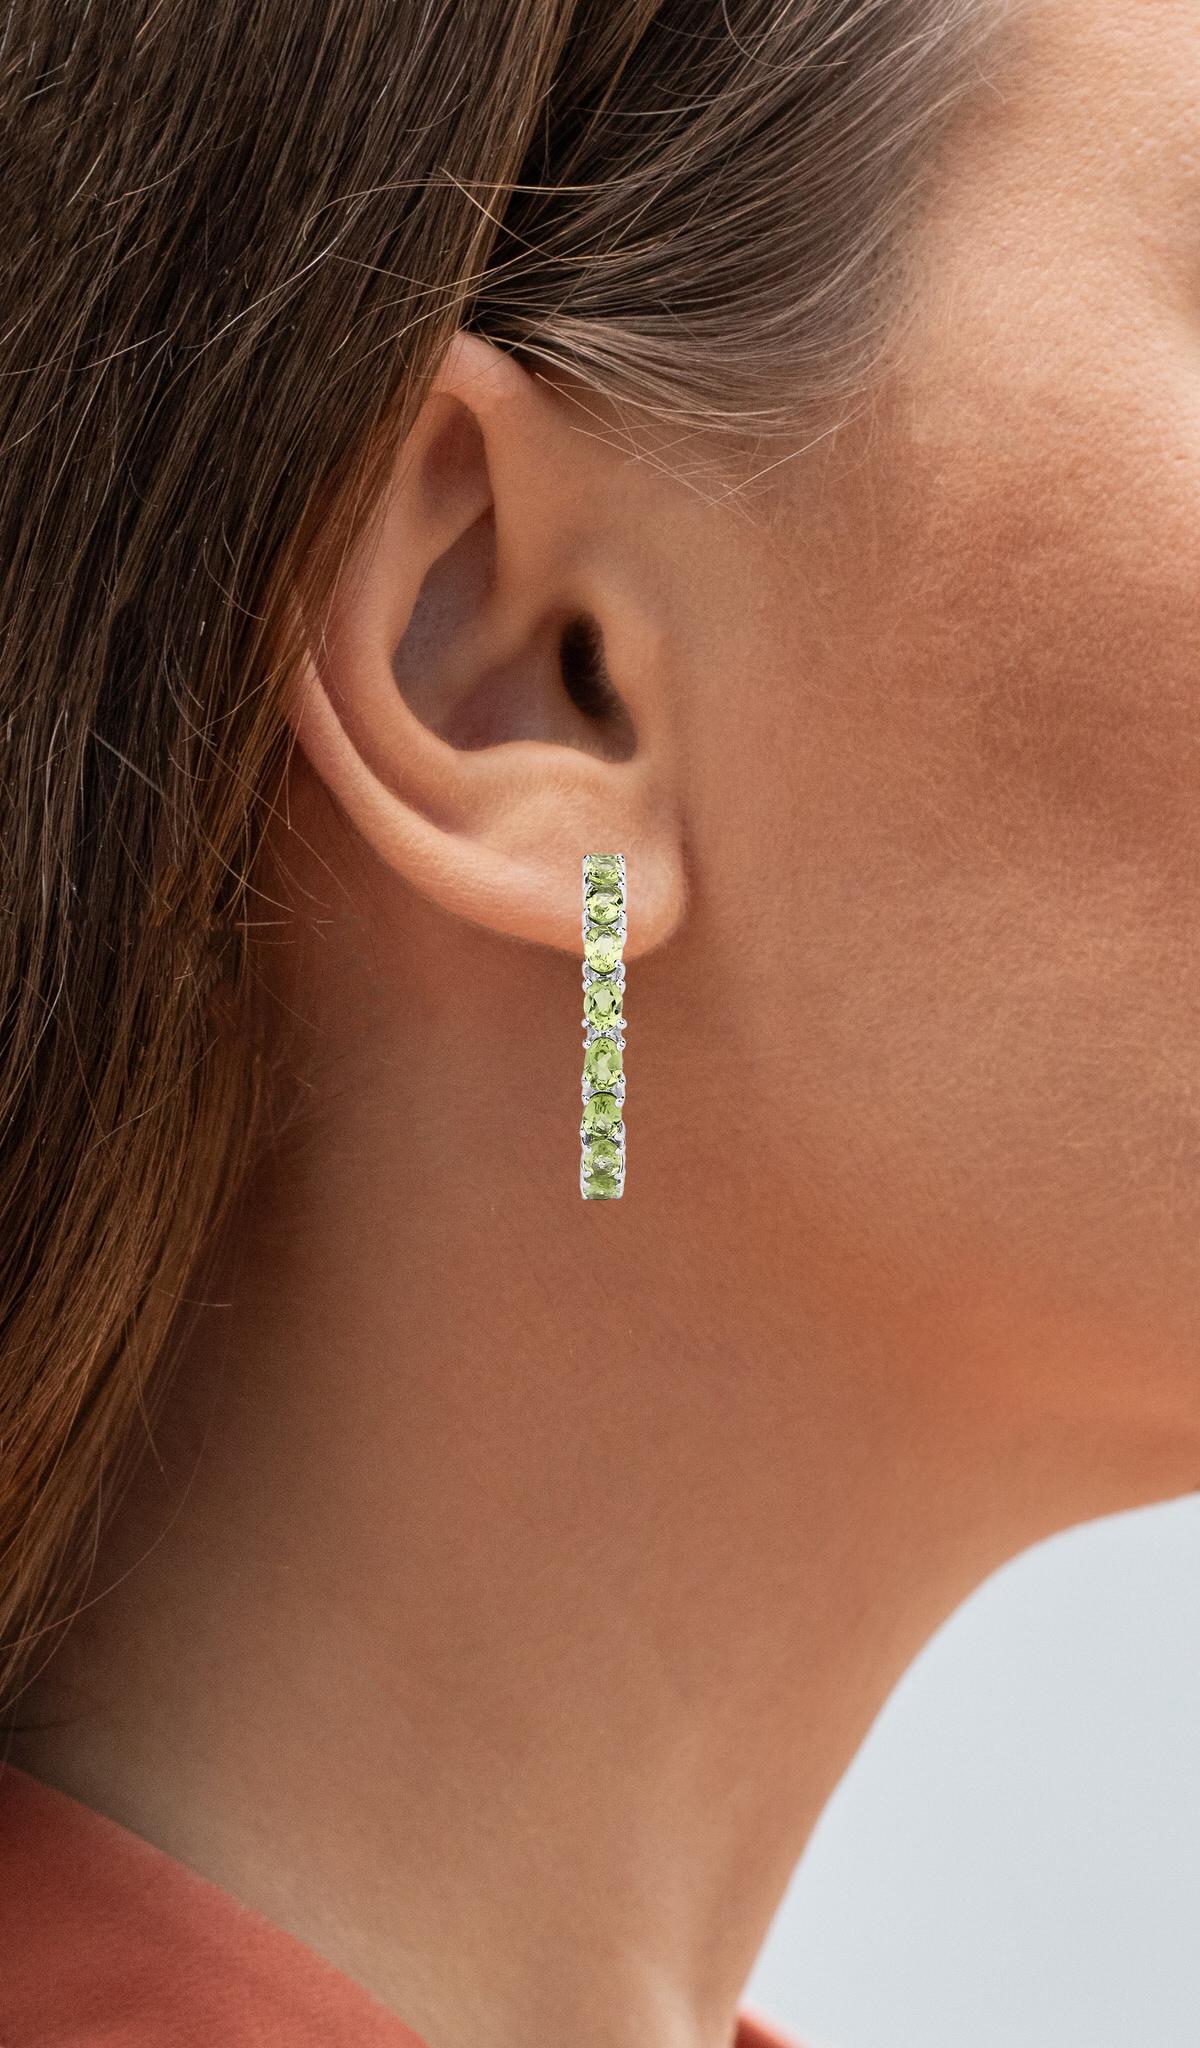 It comes with the Gemological Appraisal by GIA GG/AJP
All Gemstones are Natural
30 Peridots = 5.10 Carats
Cut: Oval; Treatments: None
Metal: Rhodium Plated Silver
Dimensions: 29.5 x 3.6 mm